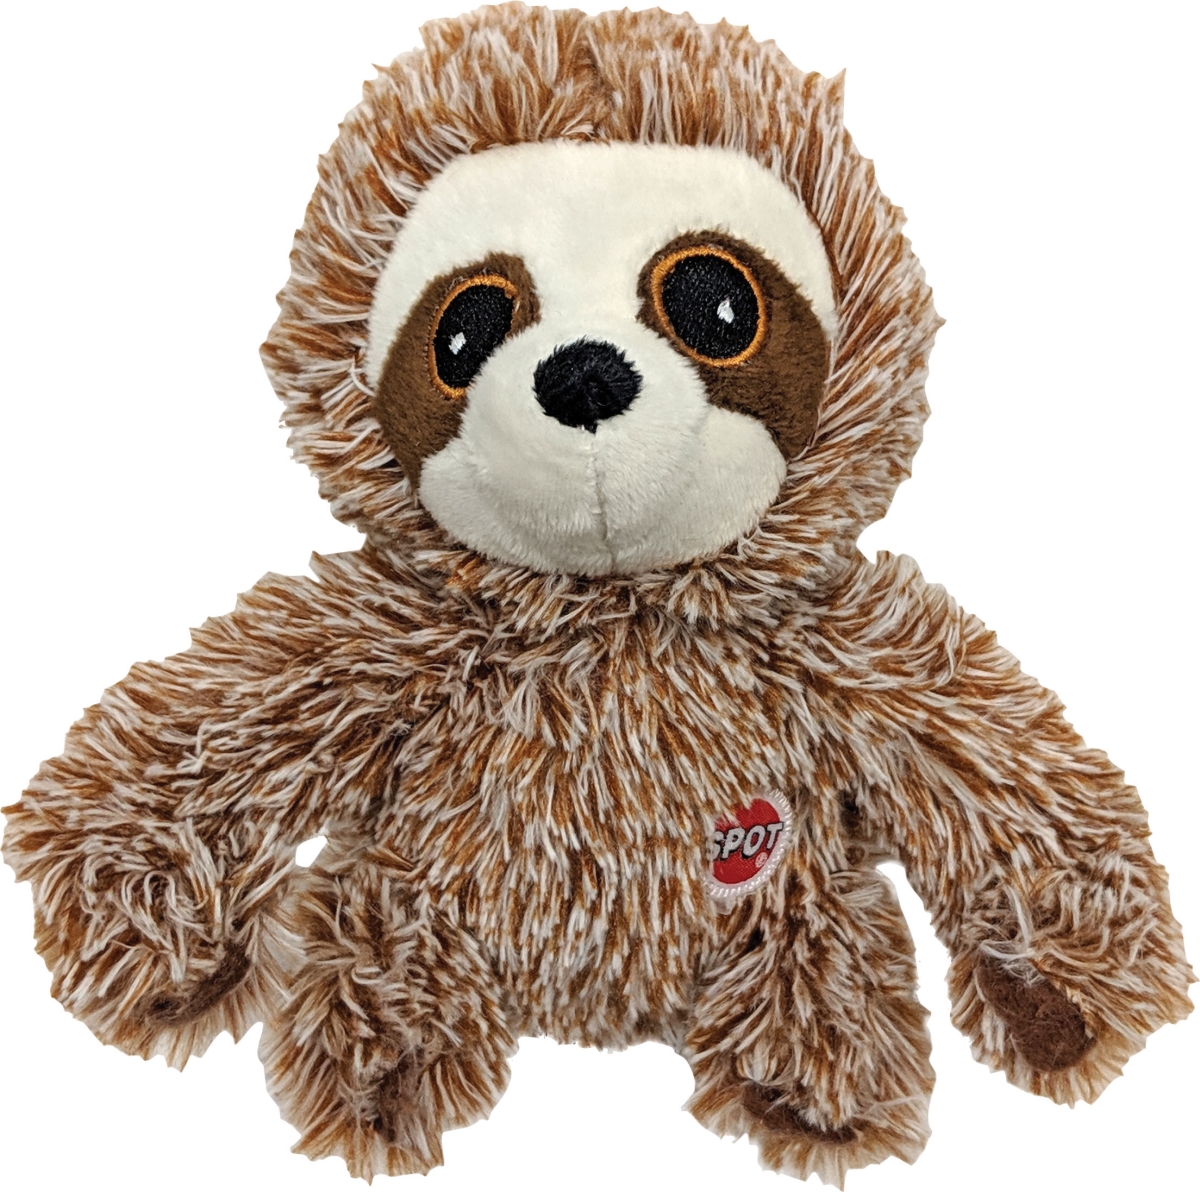 Picture of TopDawg 39112 7 in. Fun Sloth Plush, Assorted Color